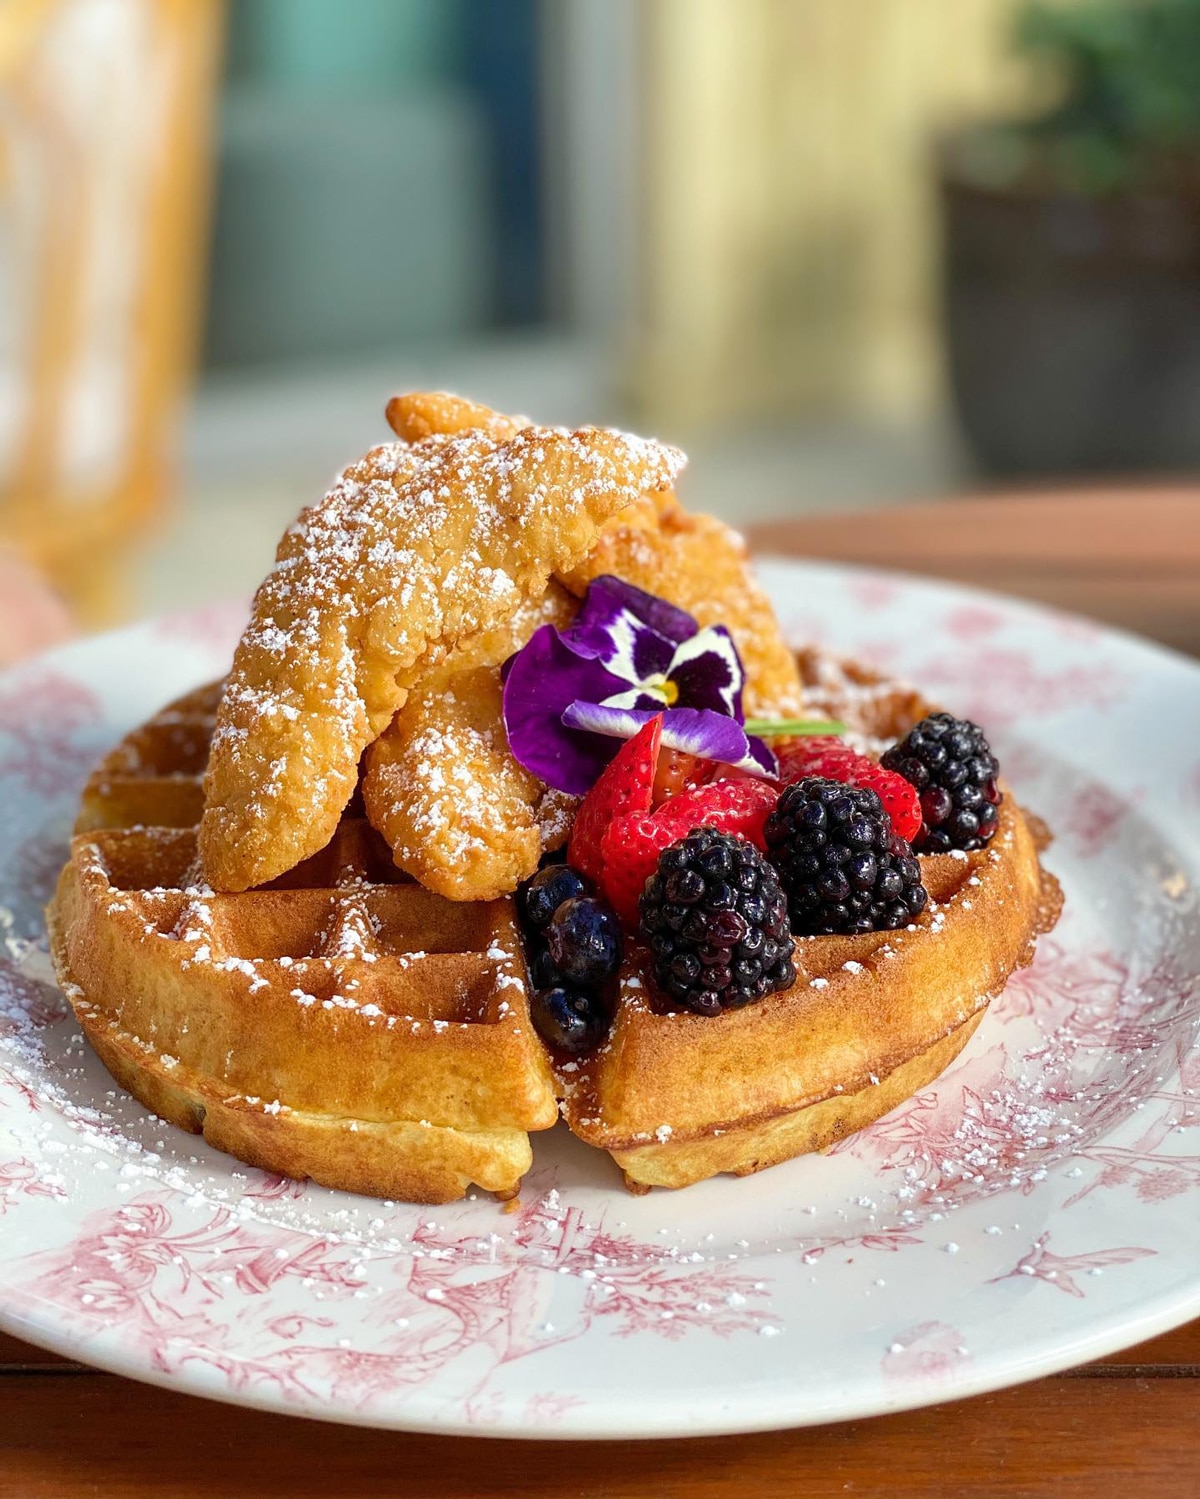 Miami Brunch Hostspot Little Hen in Midtown Miami with Instagrammable location and food chicken and waffles